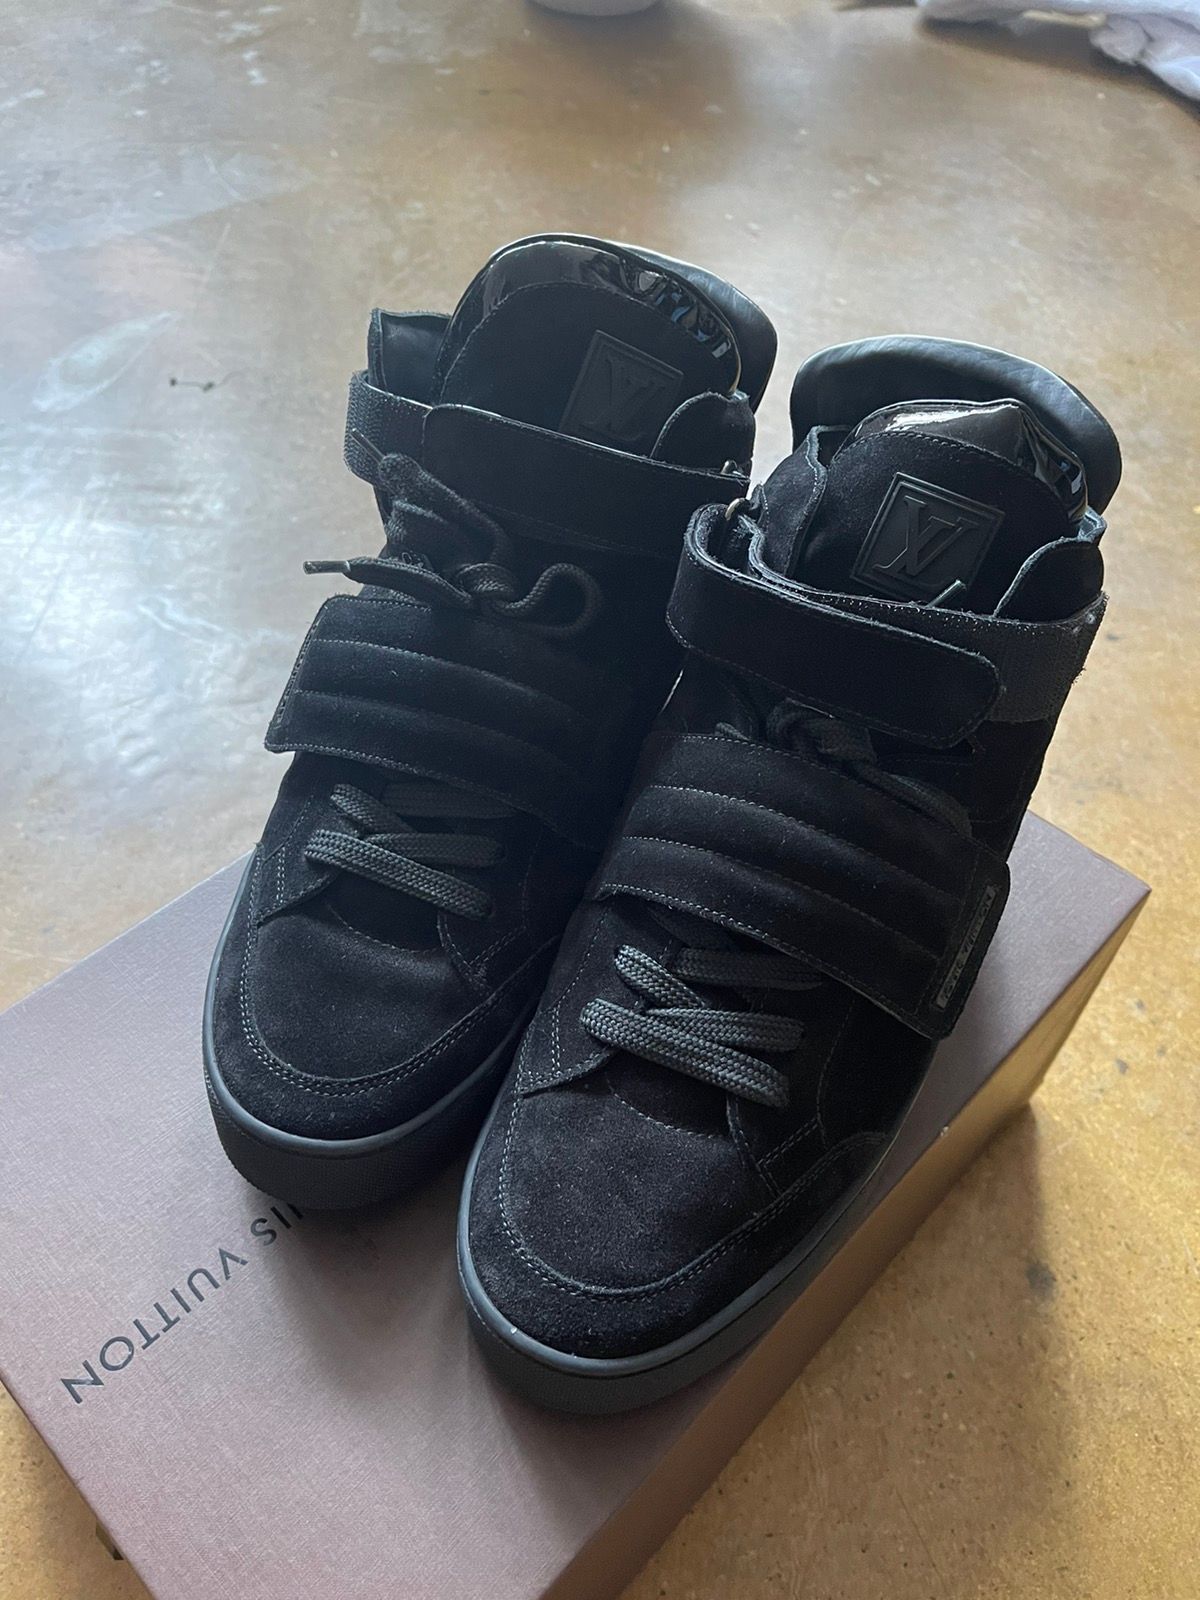 Buy Louis Vuitton LOUISVUITTON x Kanye West Size: 8 Jasper High Cut  Sneakers from Japan - Buy authentic Plus exclusive items from Japan